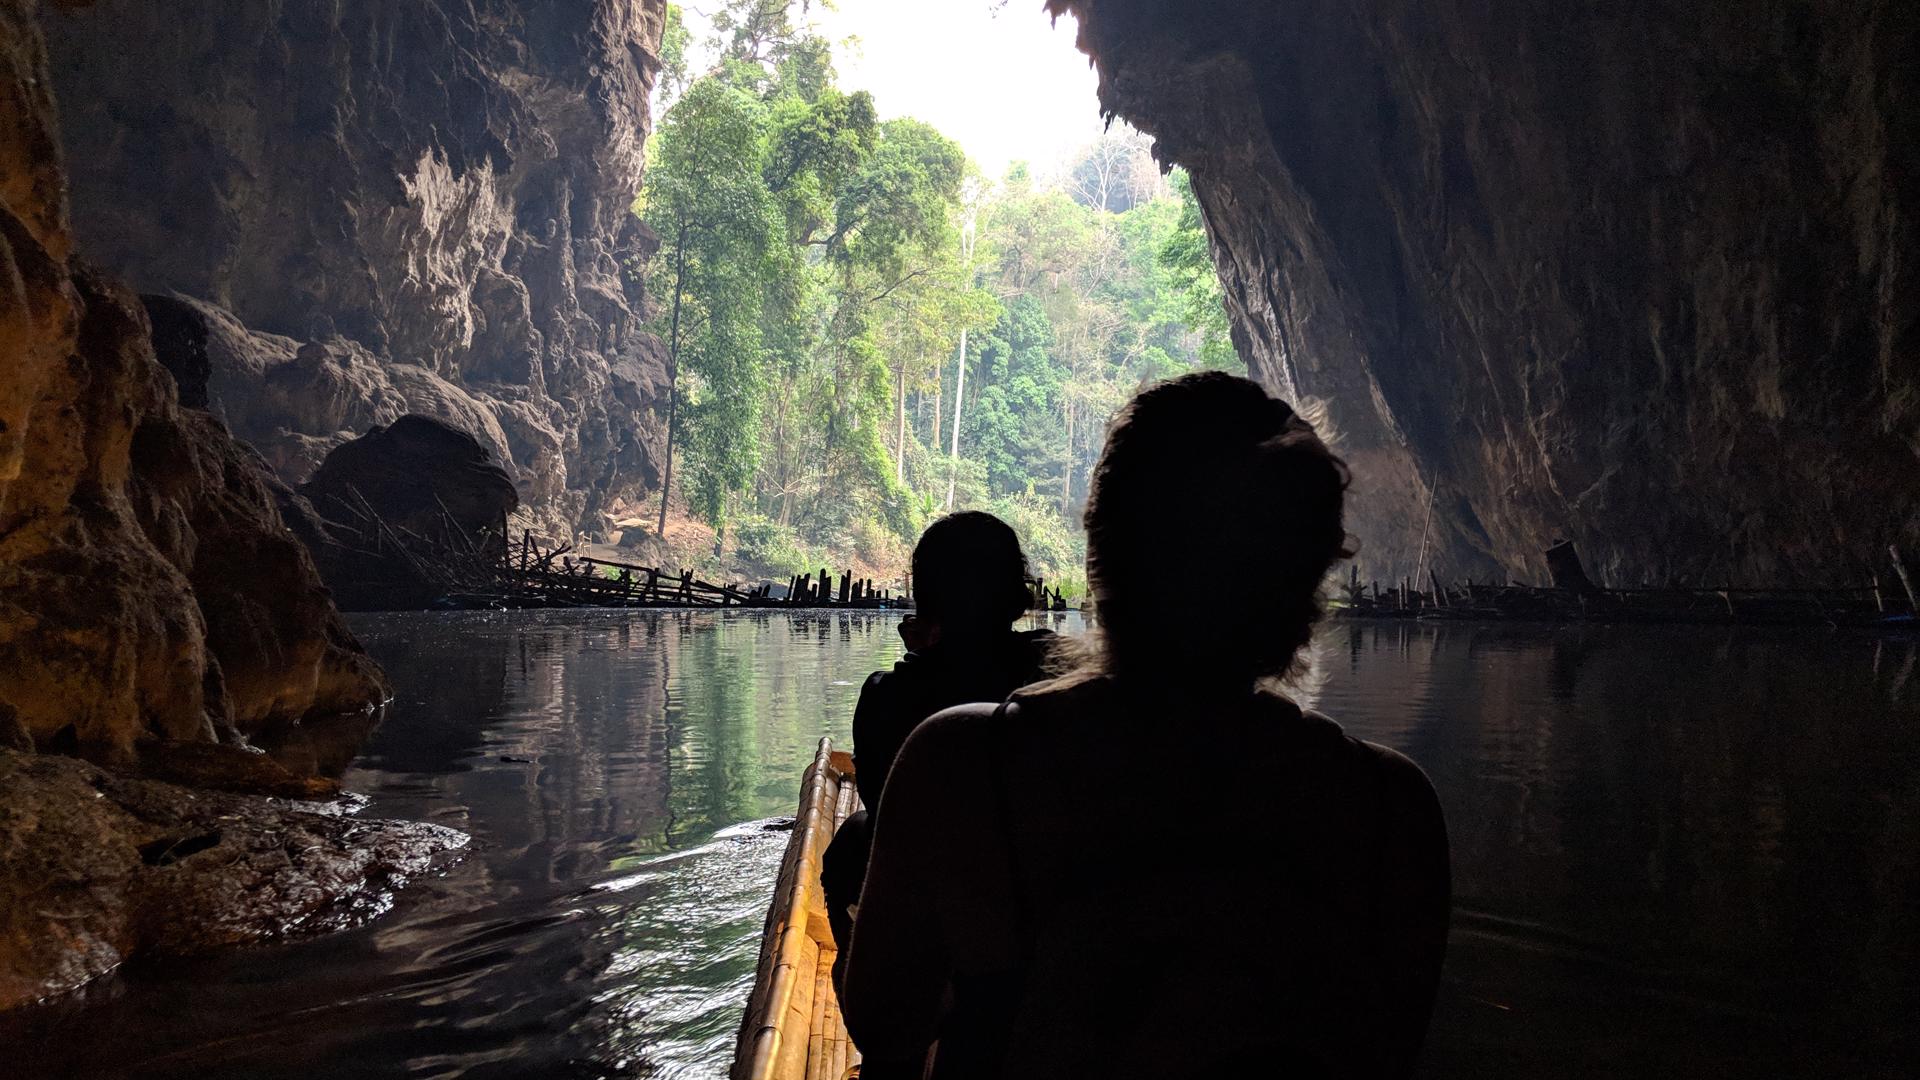 Bamboo Rafting Through Tham Lod Cave in Thailand